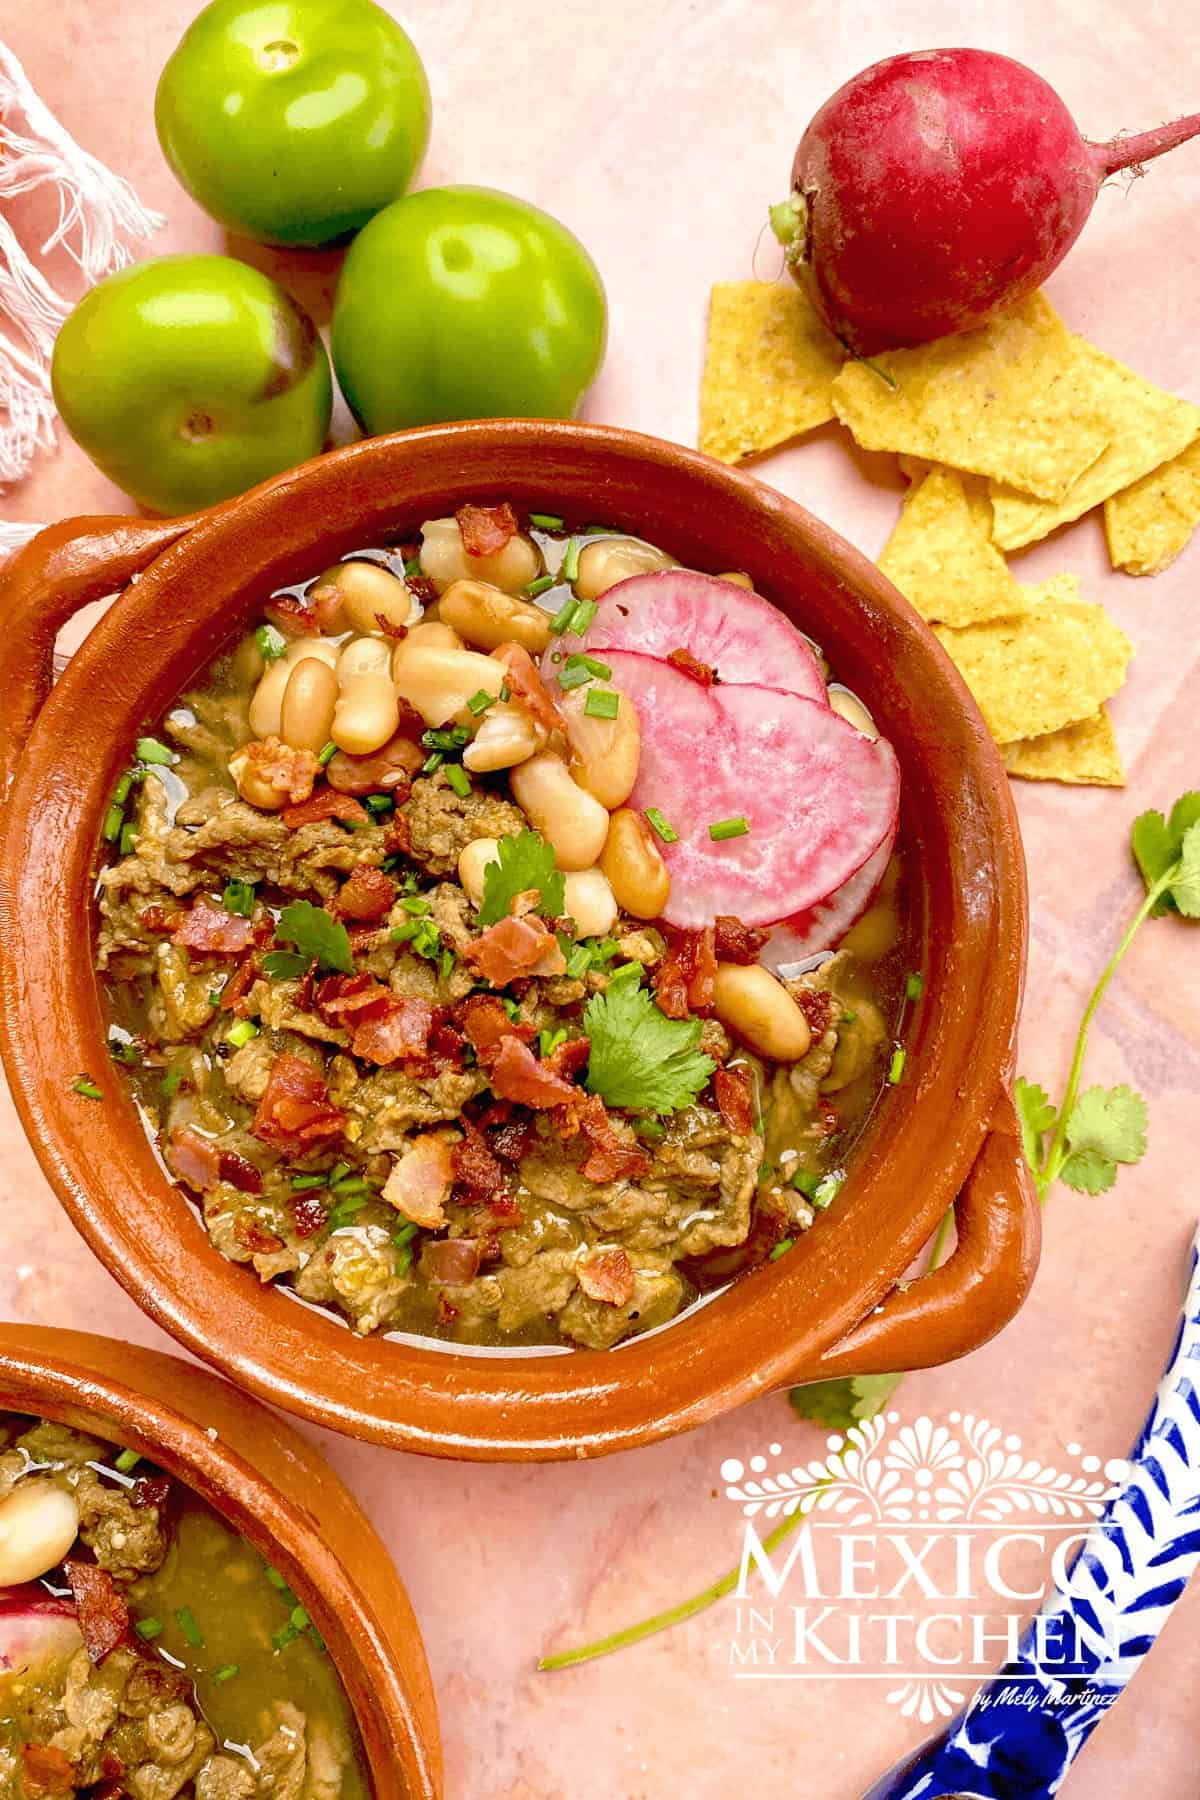 Carne en su jugo served in a bowl topped with beans, radishes, and bacon.